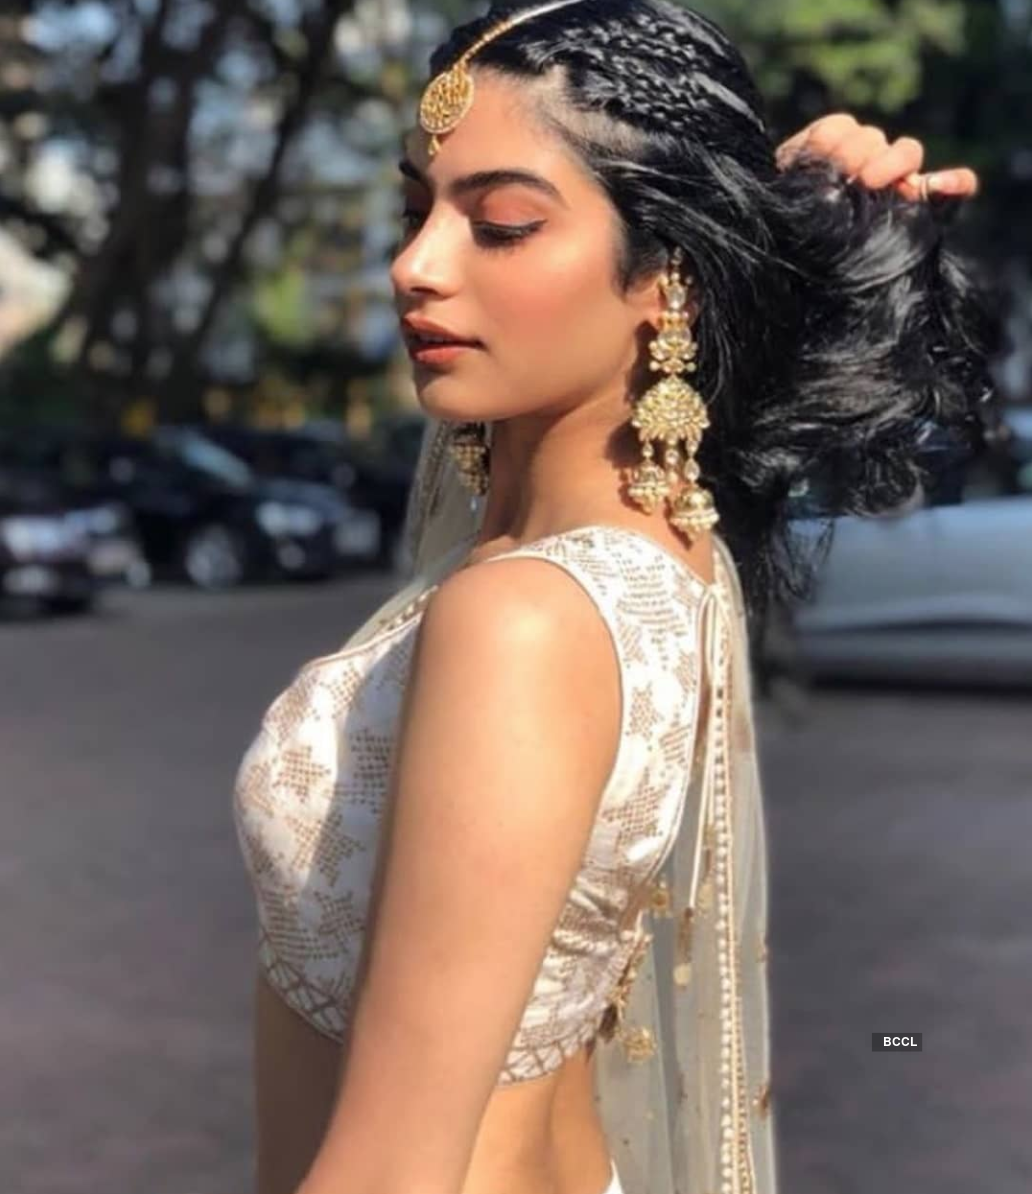 Inside pictures of Sonam Kapoor & Anand Ahuja's glittery sangeet ceremony